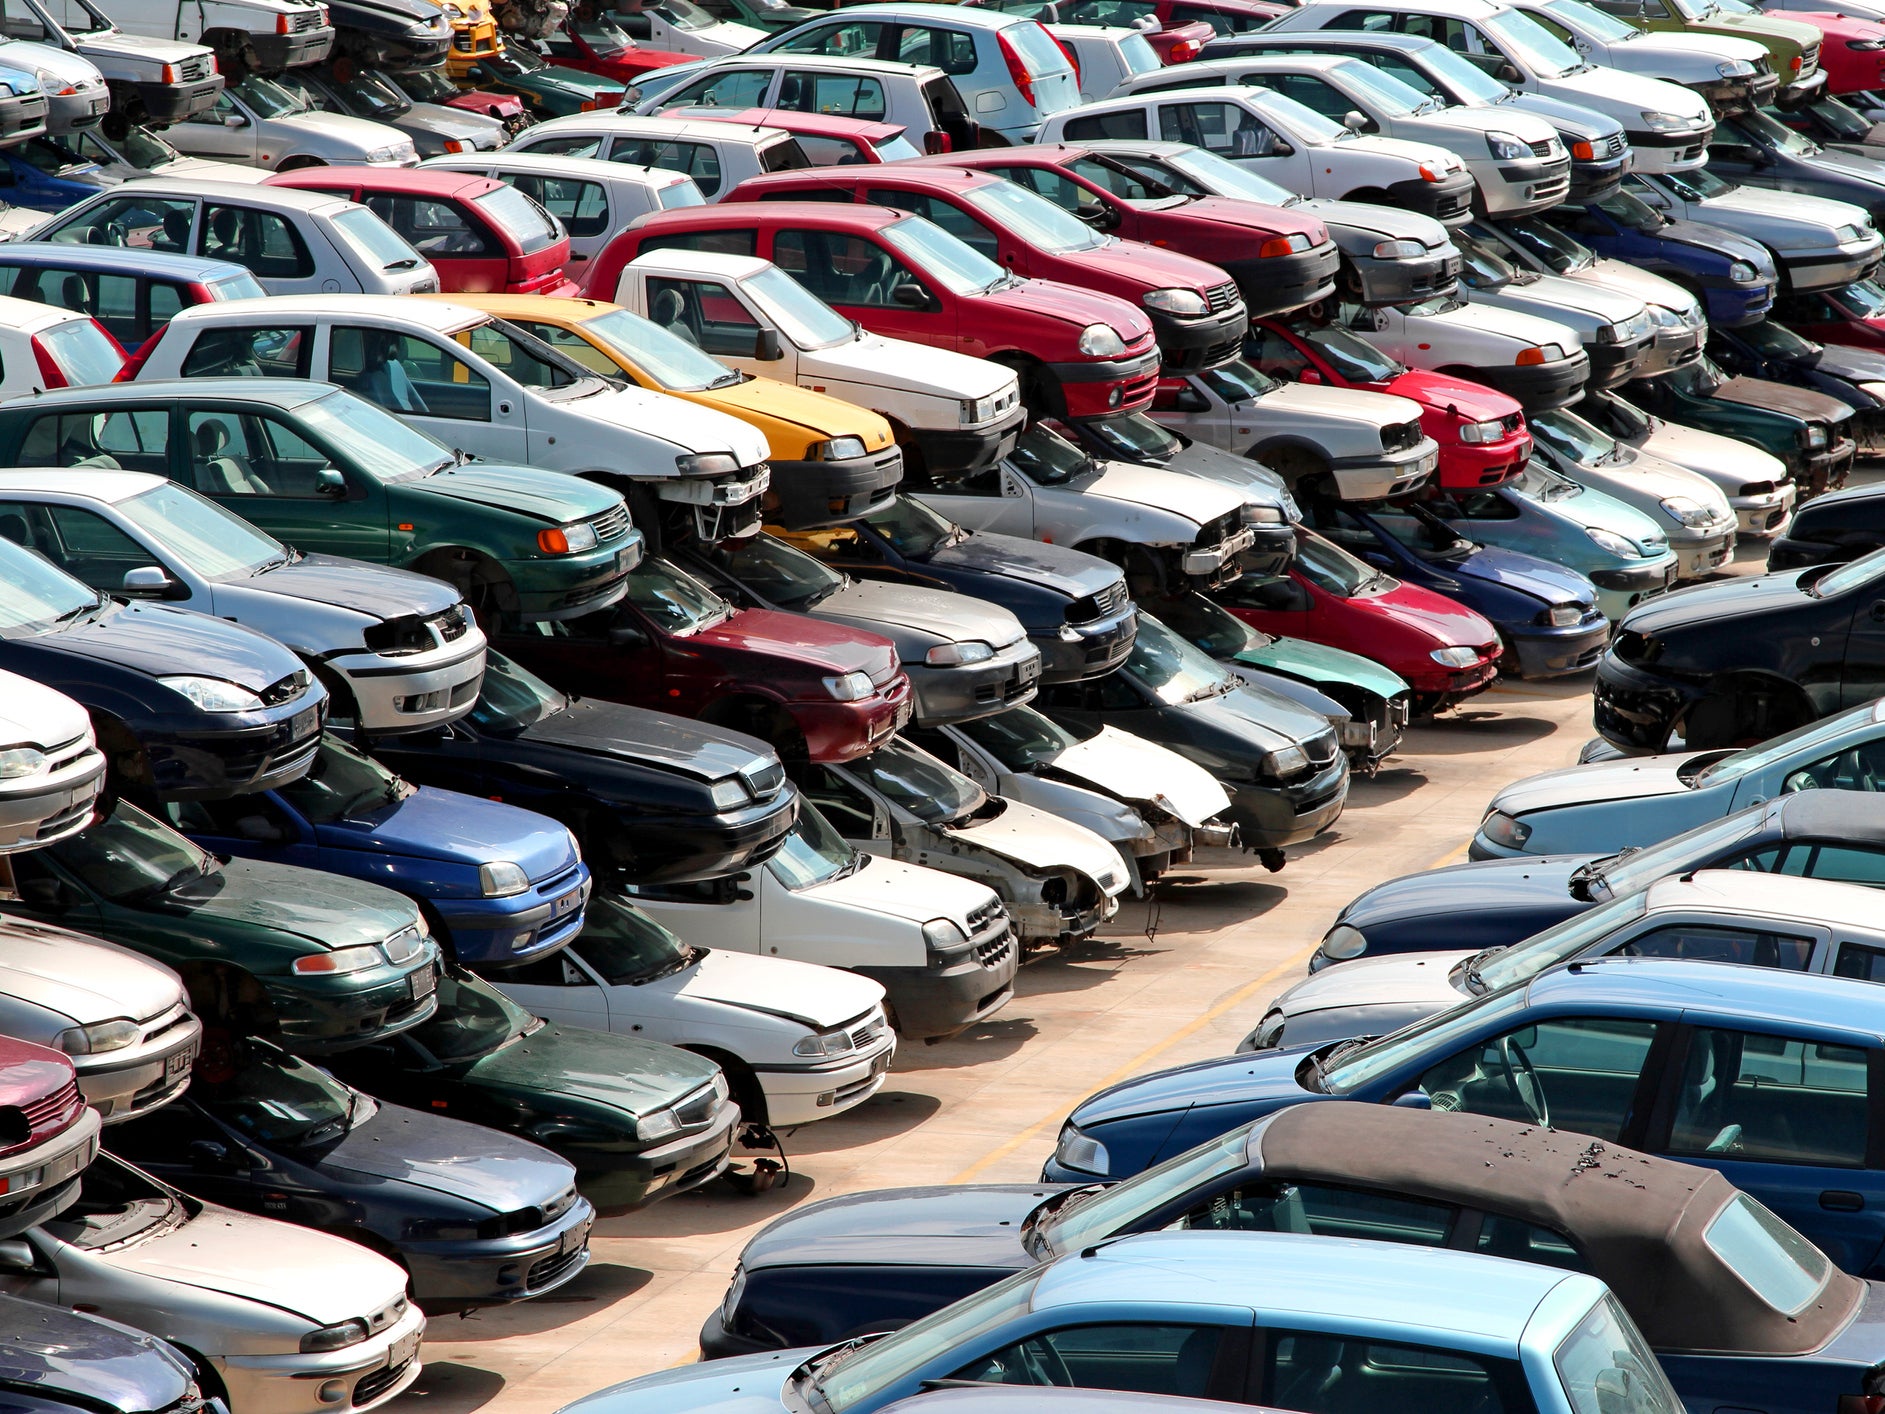 The average lifespan of a car in the UK is just over eight years